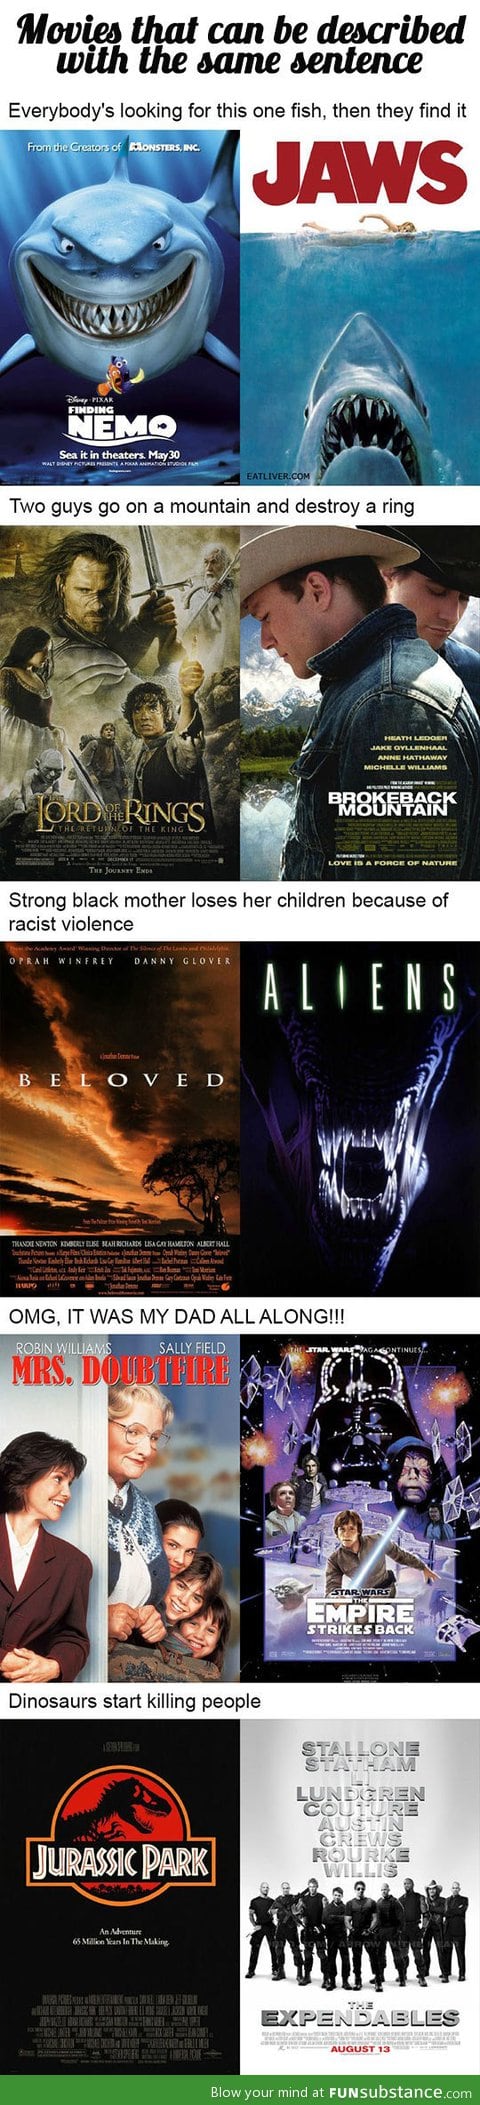 Movies that can be described